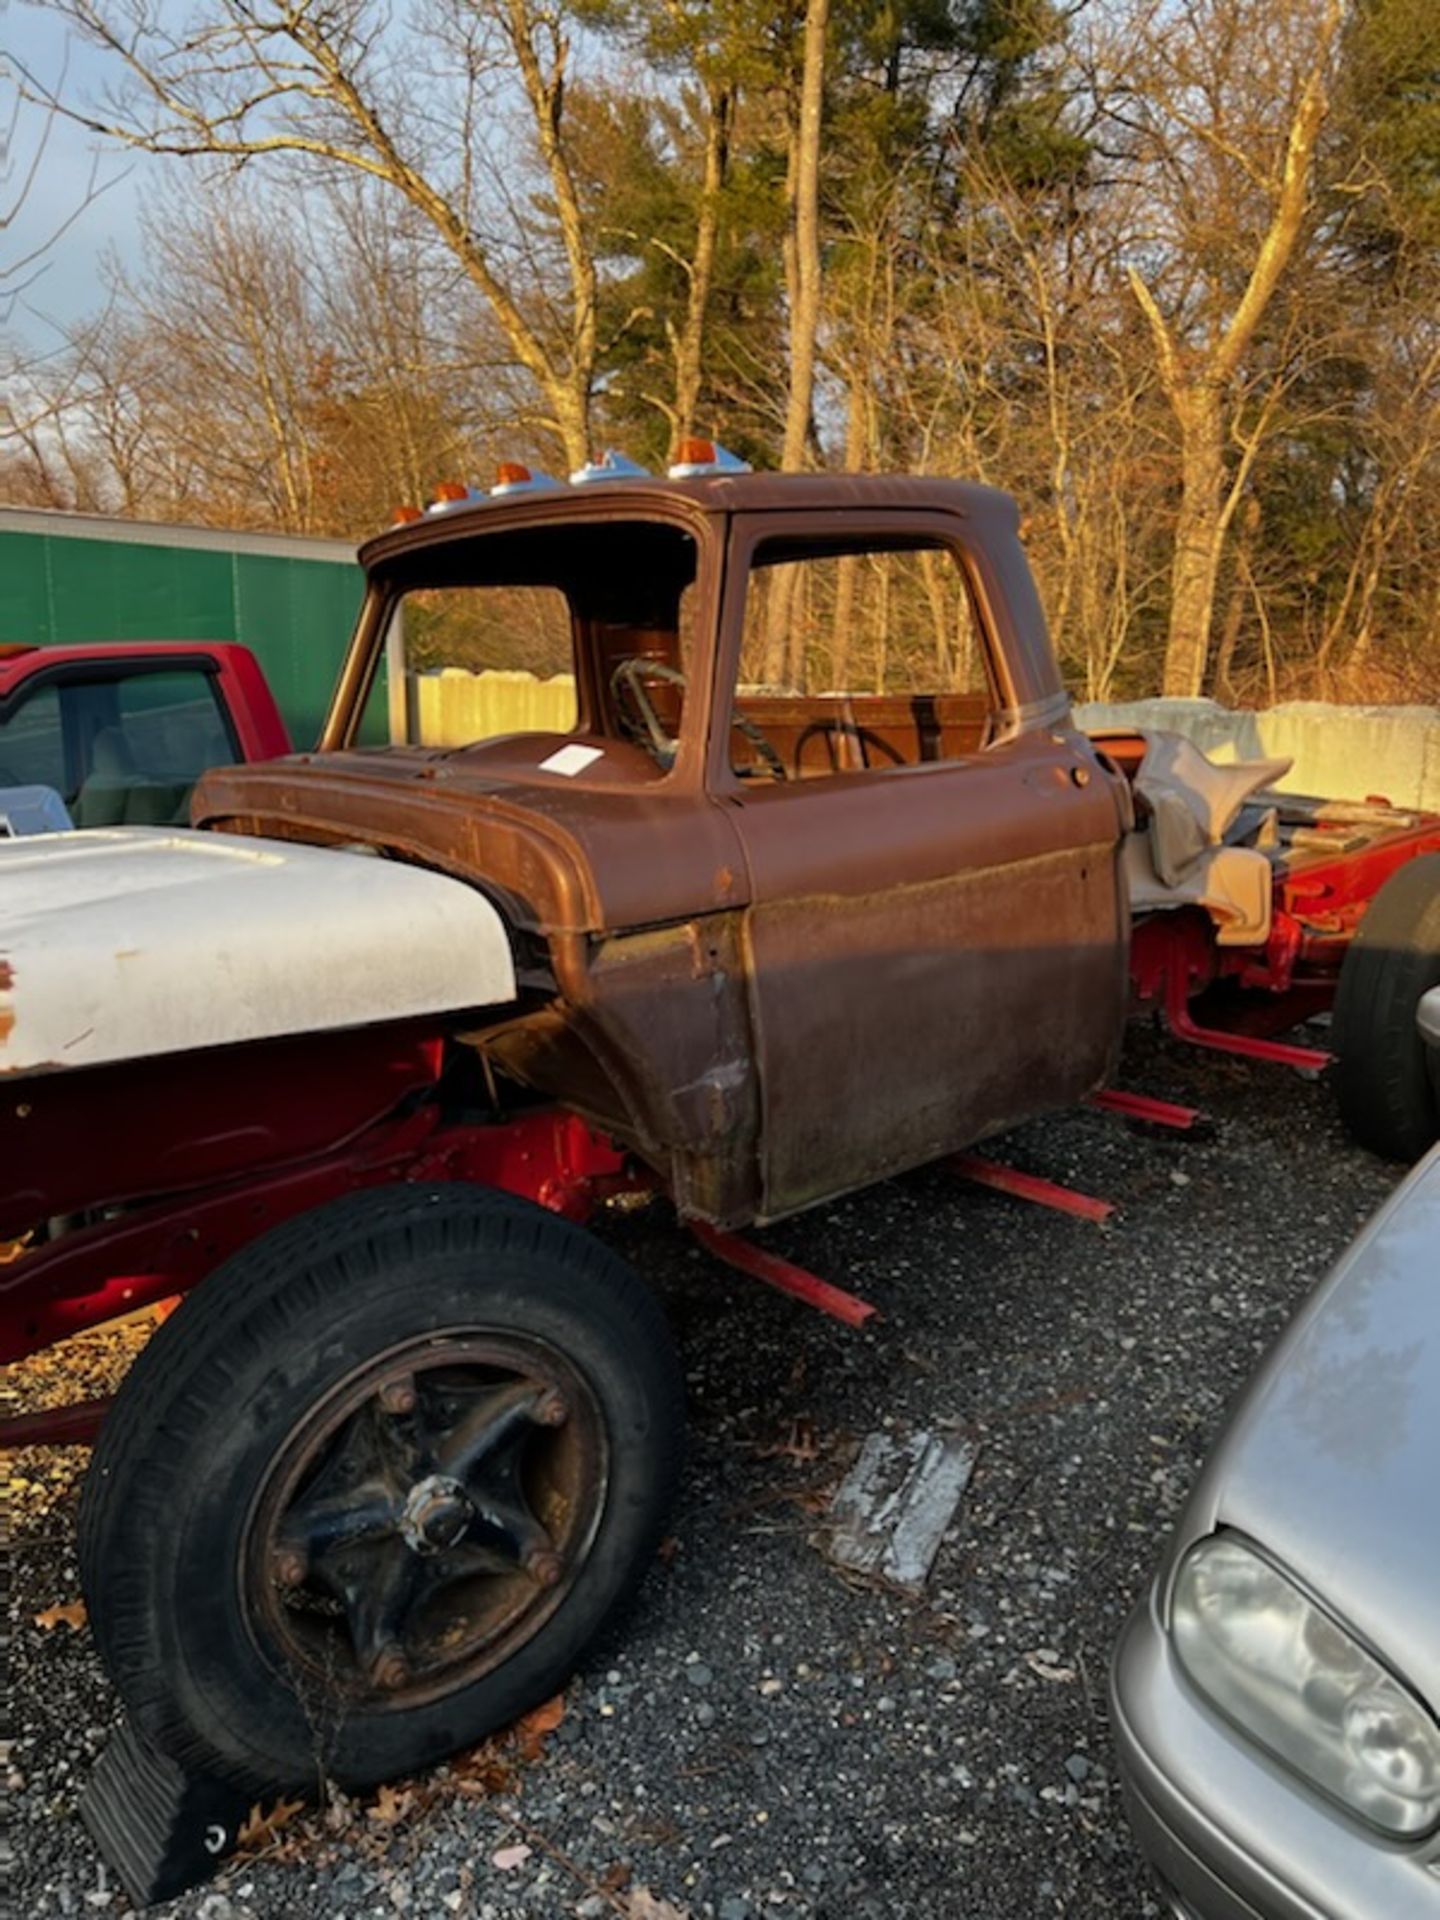 1963 Ford F600 Project Truck, 6 Wheel, 352 V8 (Many Parts to Restore) - Image 2 of 2